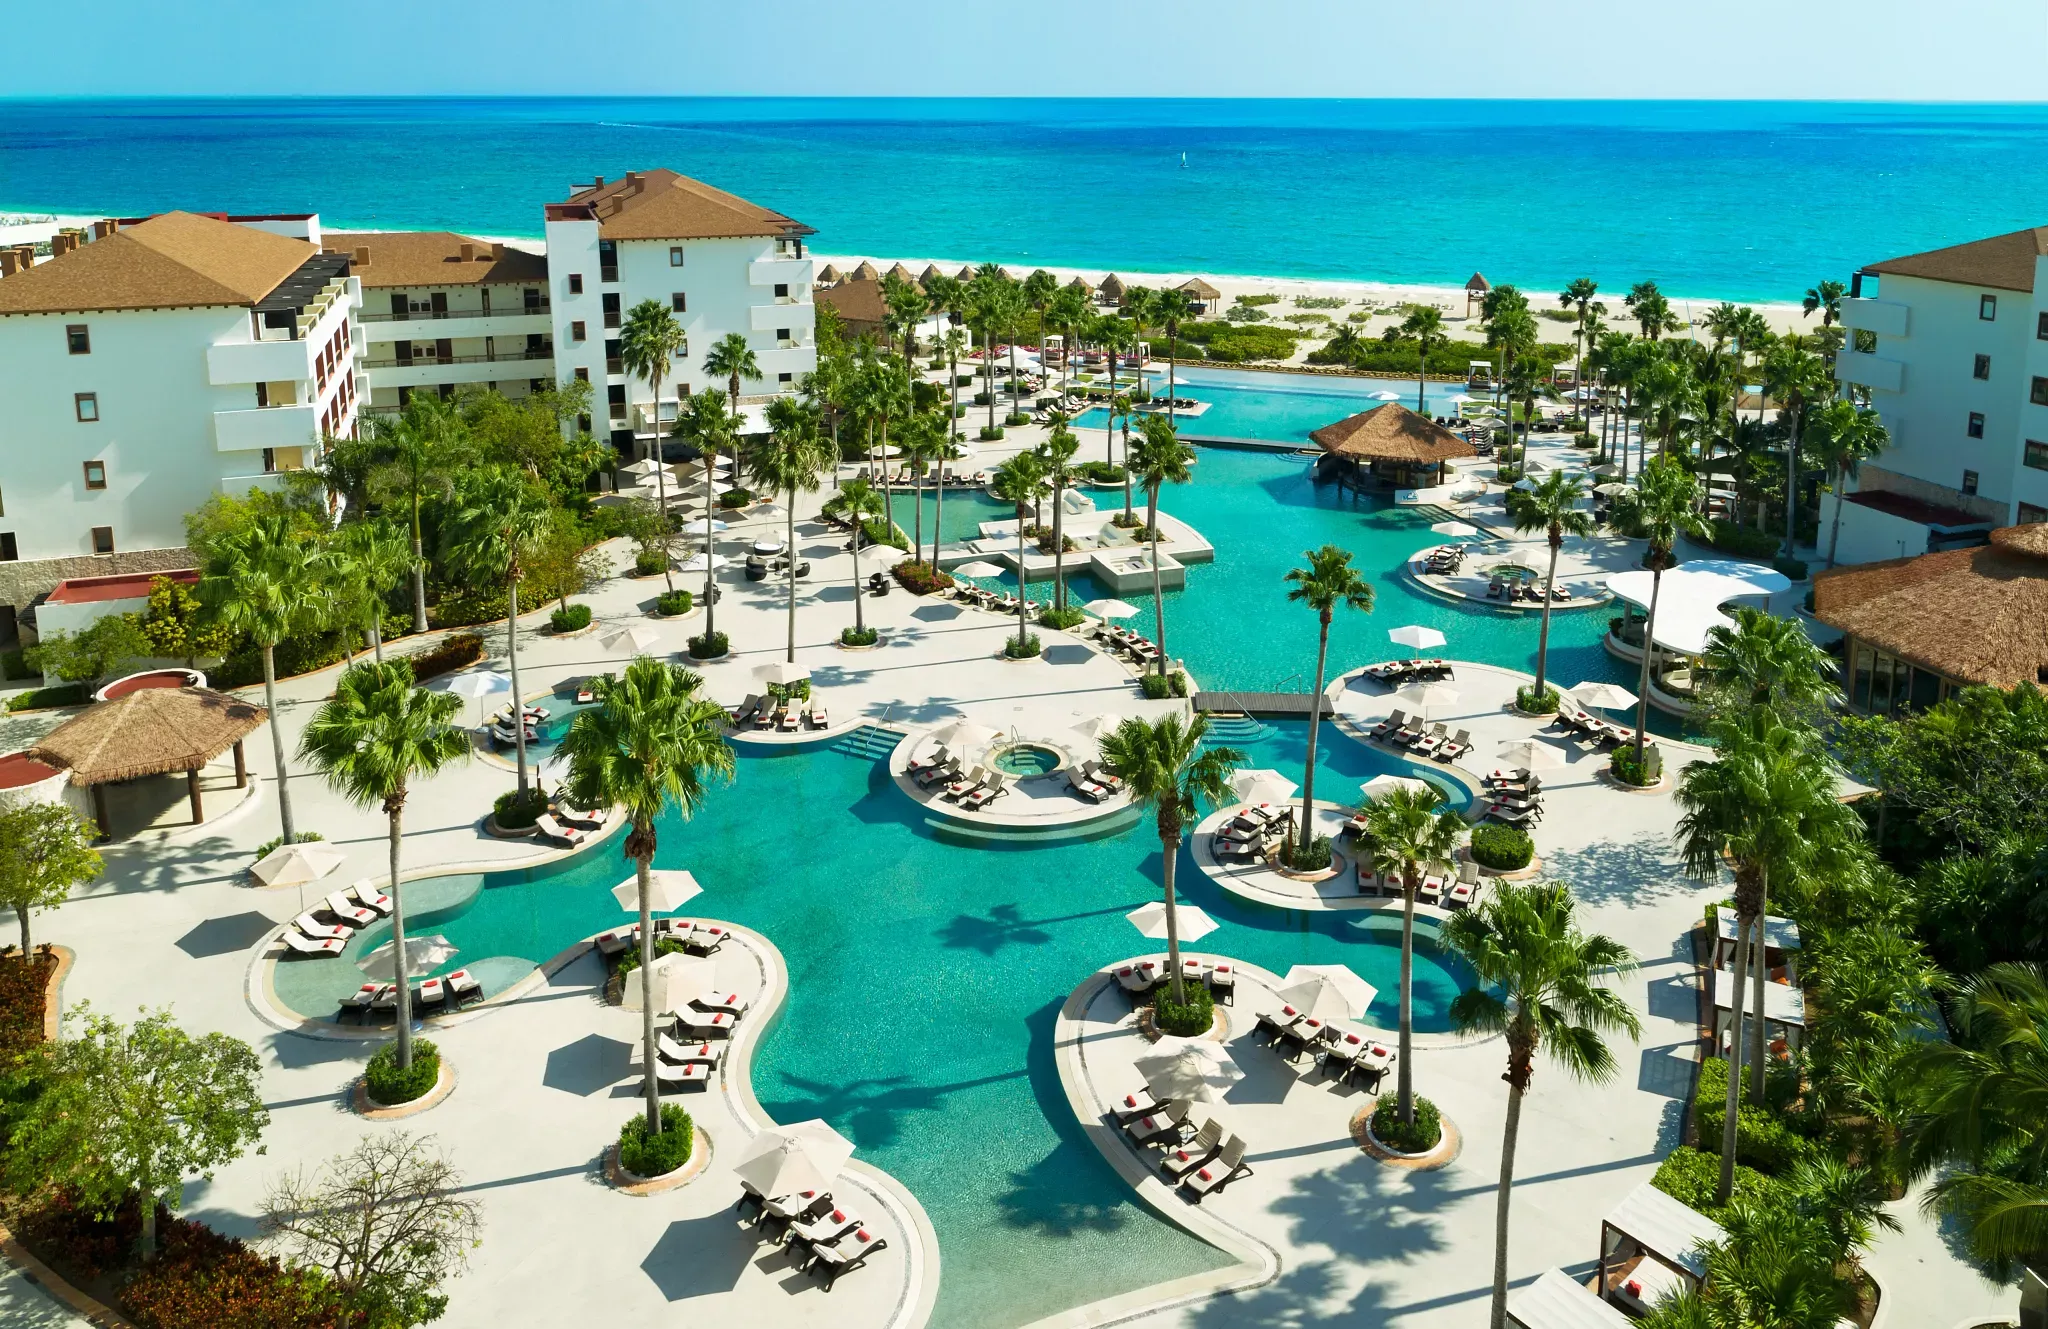 Secrets Playa Mujeres 5* - Adult Only